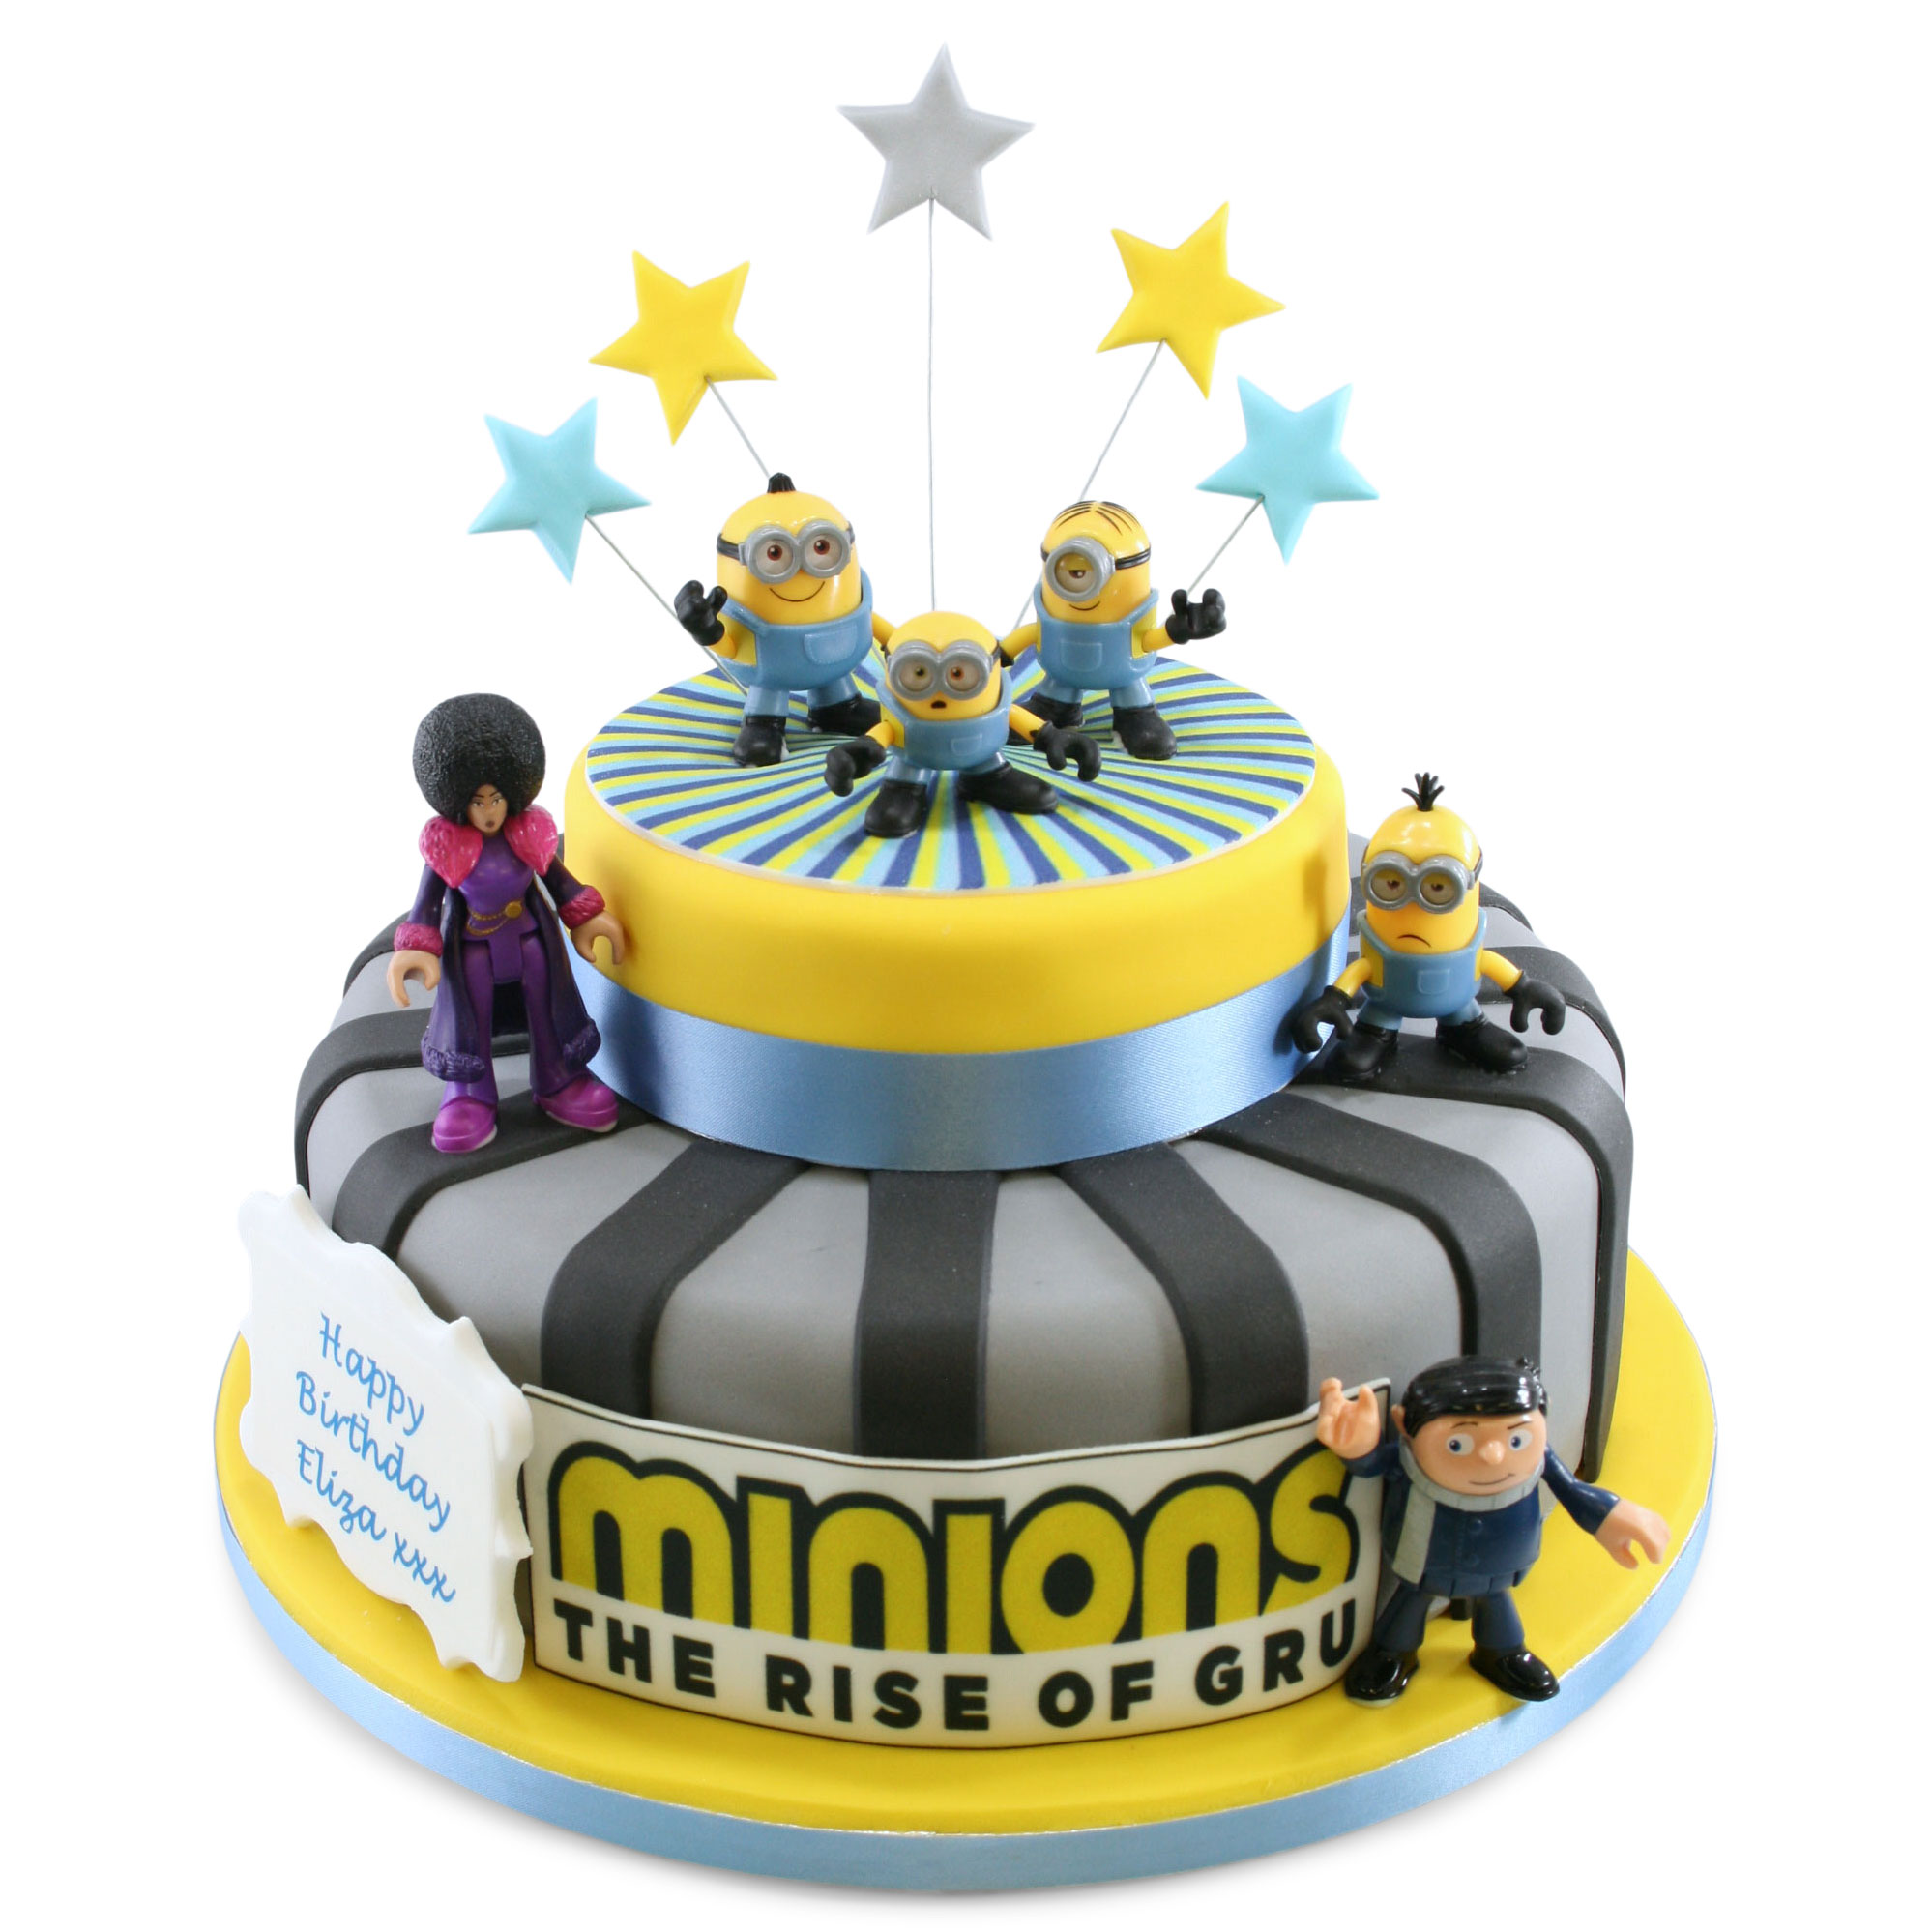 Minions Birthday Cake Ideas Images (Pictures)